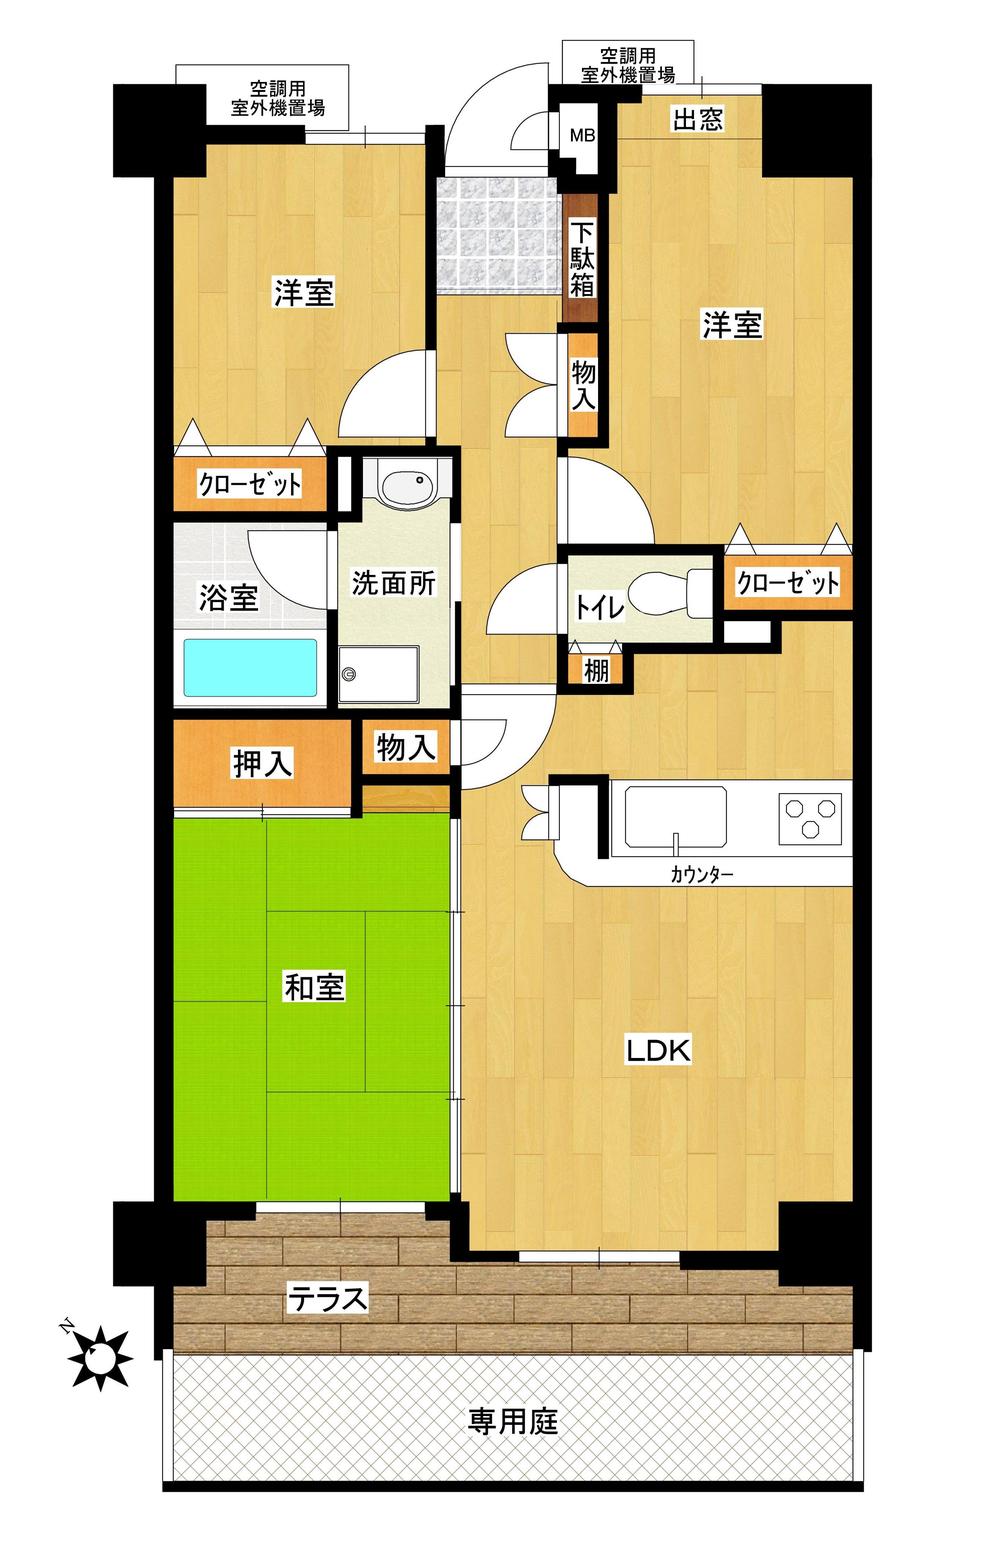 Floor plan. 3LDK, Price 12 million yen, Spacious apartment there is a private garden in the occupied area 62.58 sq m 3LDk!